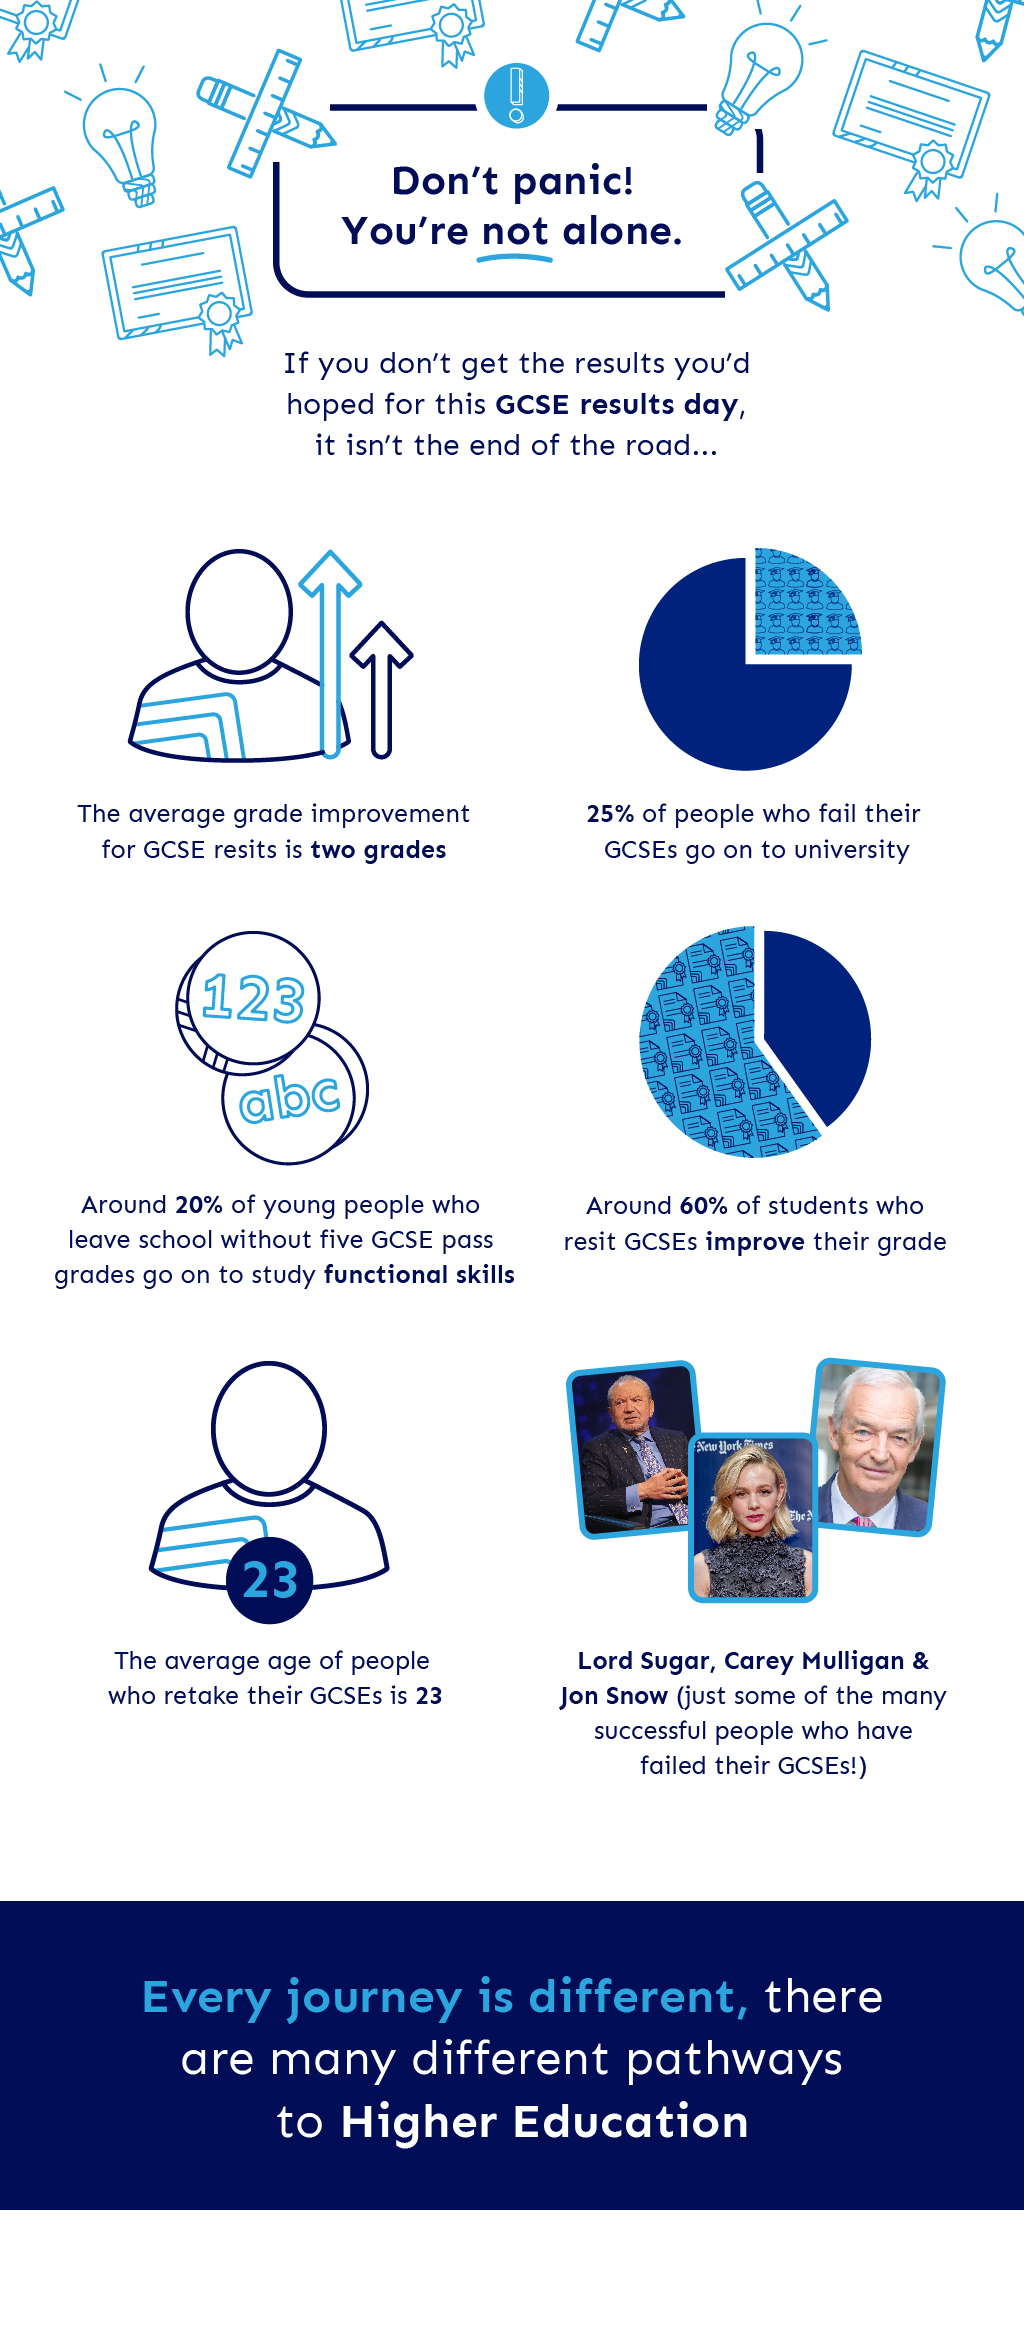 GCSE Results Day - Infographic with statistics on resits and alternative qualifications